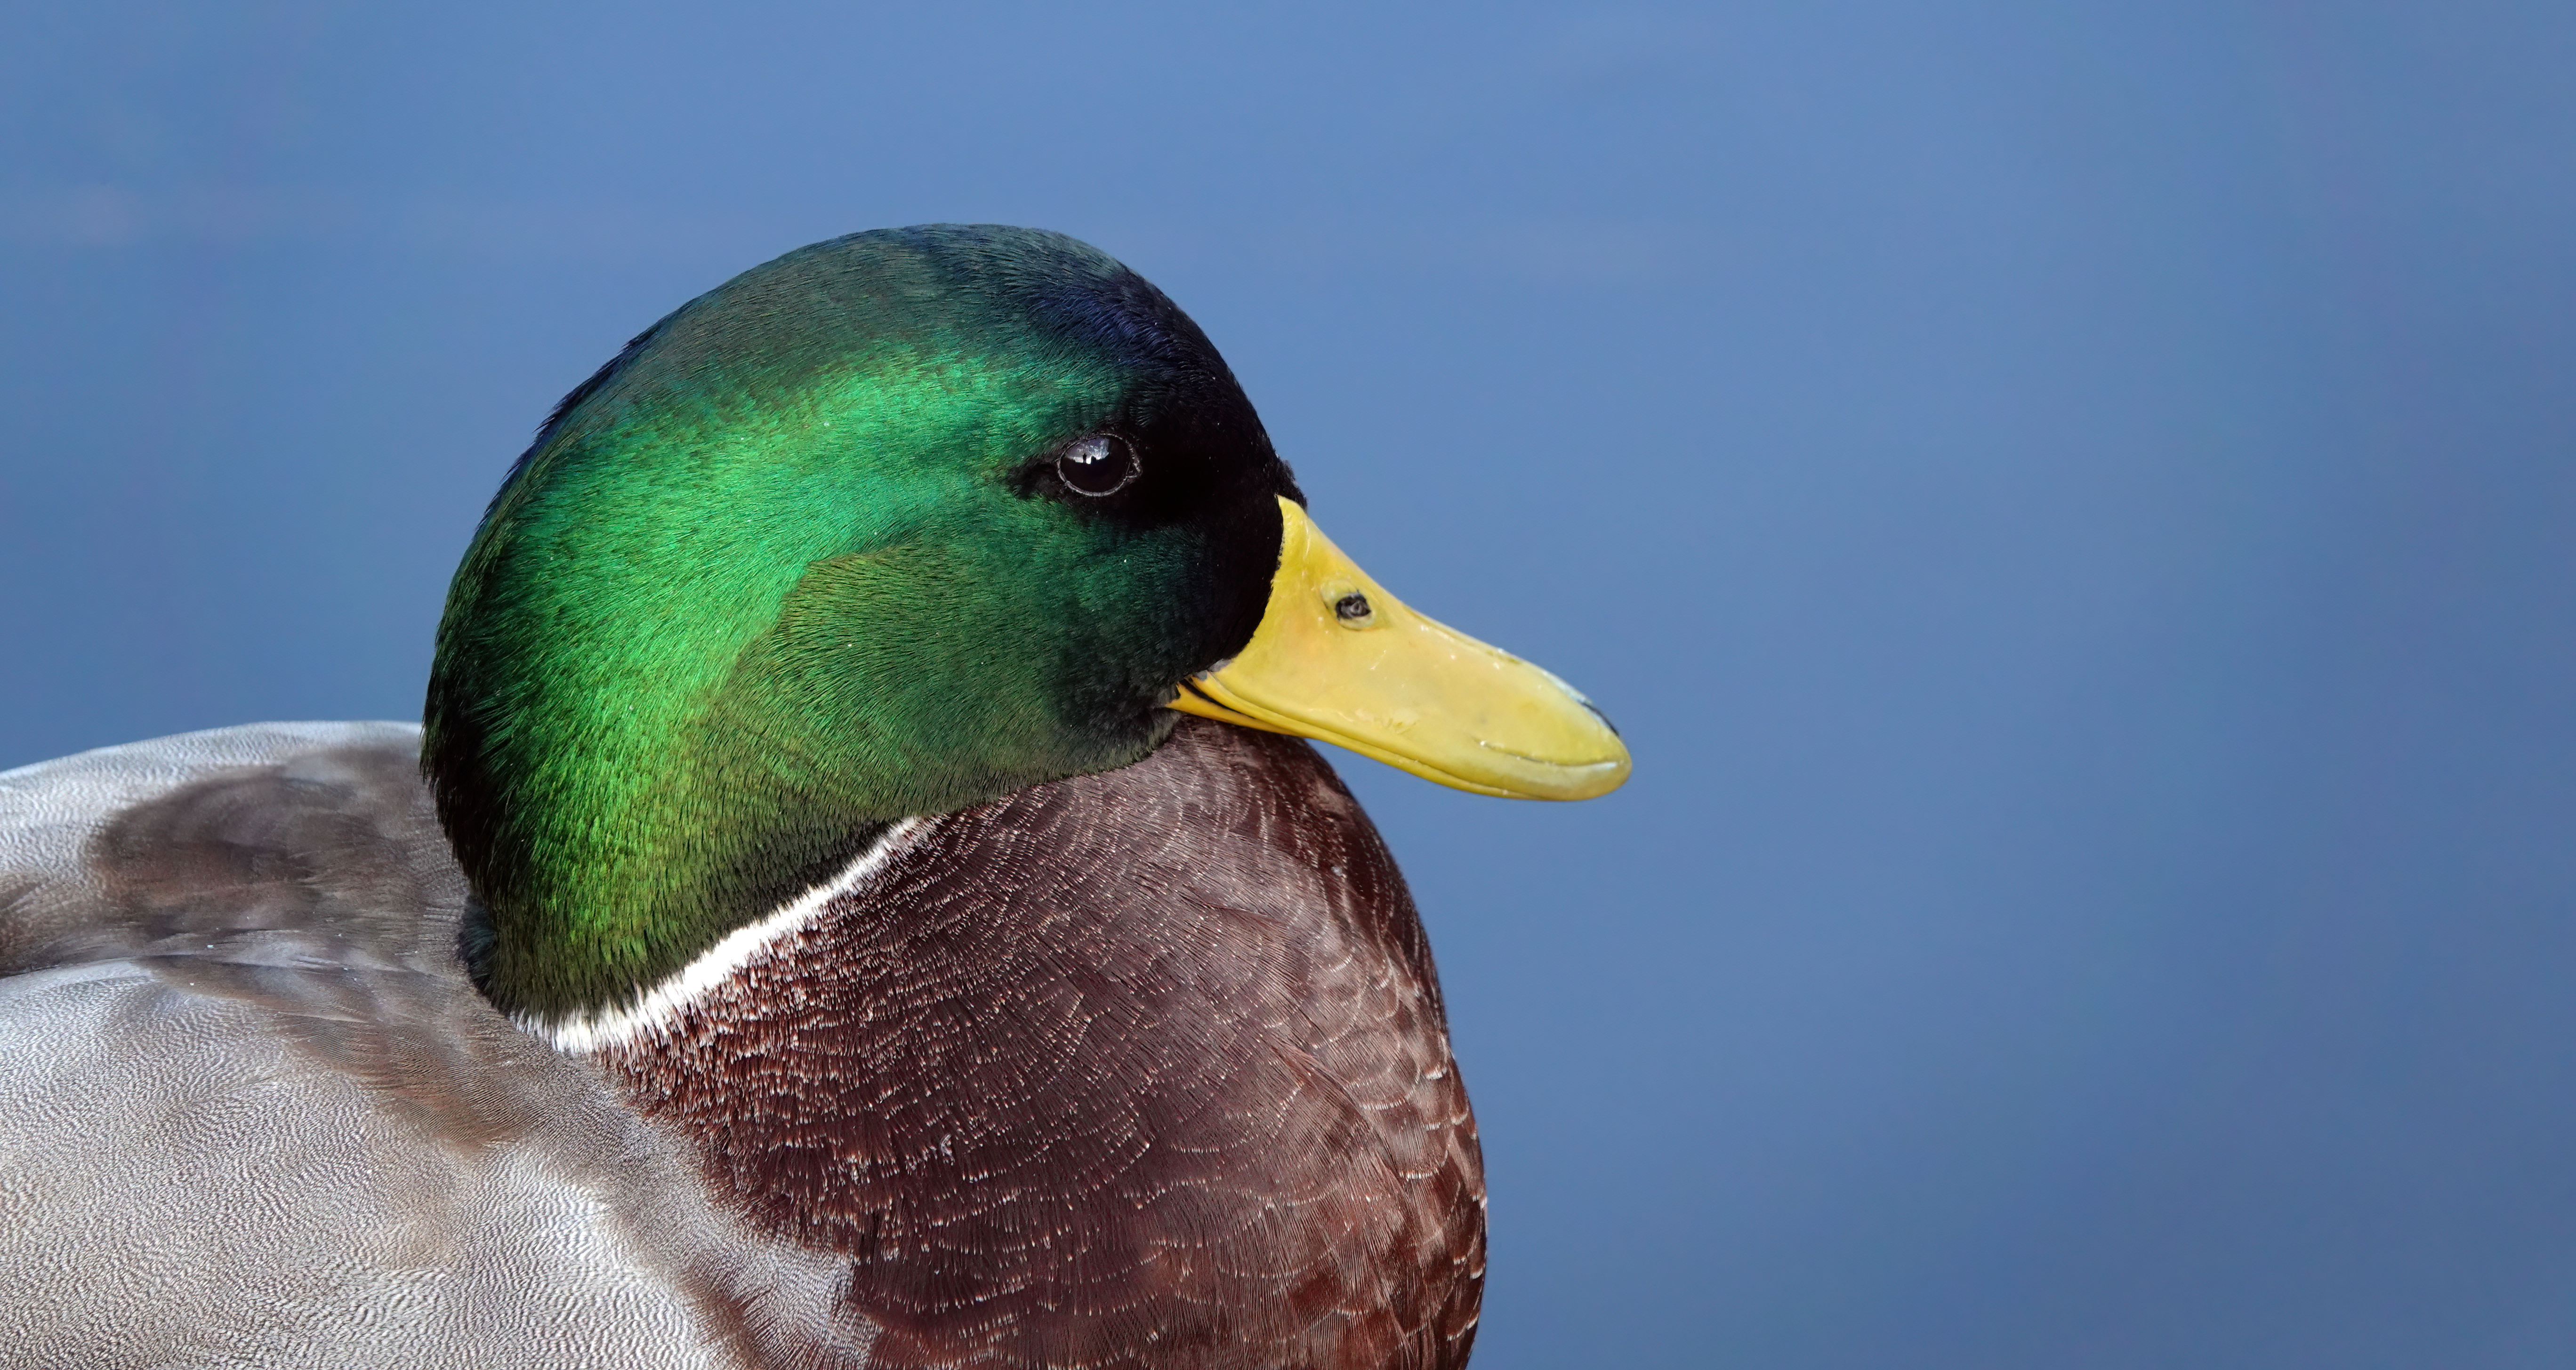 Duck with Man Face - Head